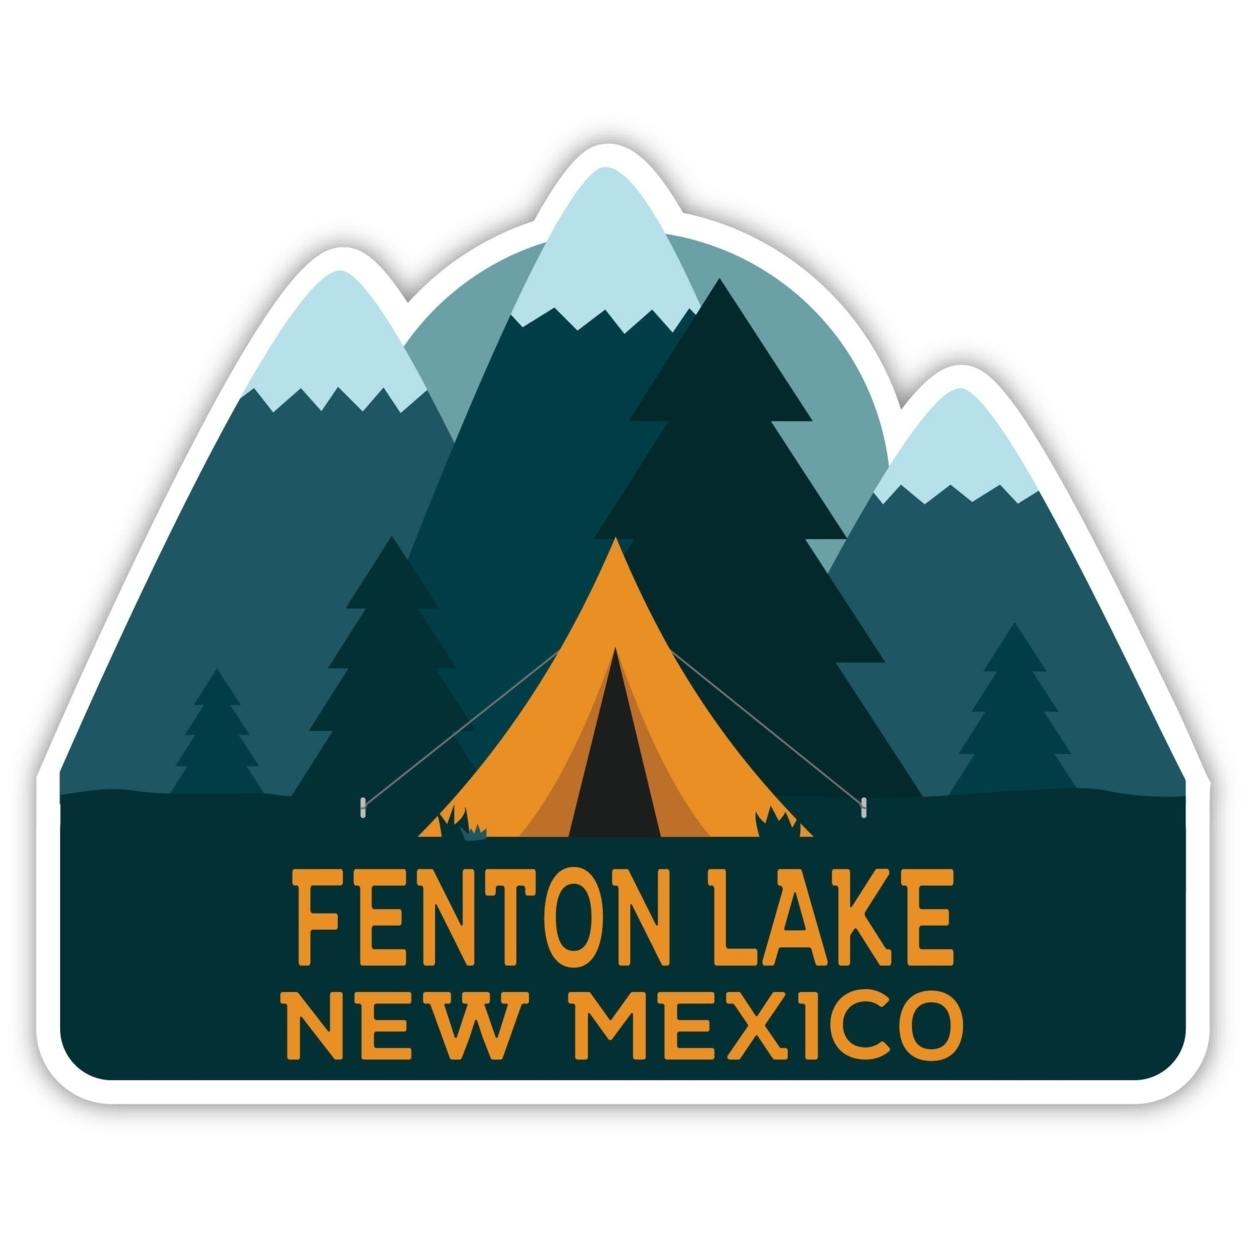 Fenton Lake New Mexico Souvenir Decorative Stickers (Choose Theme And Size) - 4-Pack, 8-Inch, Tent